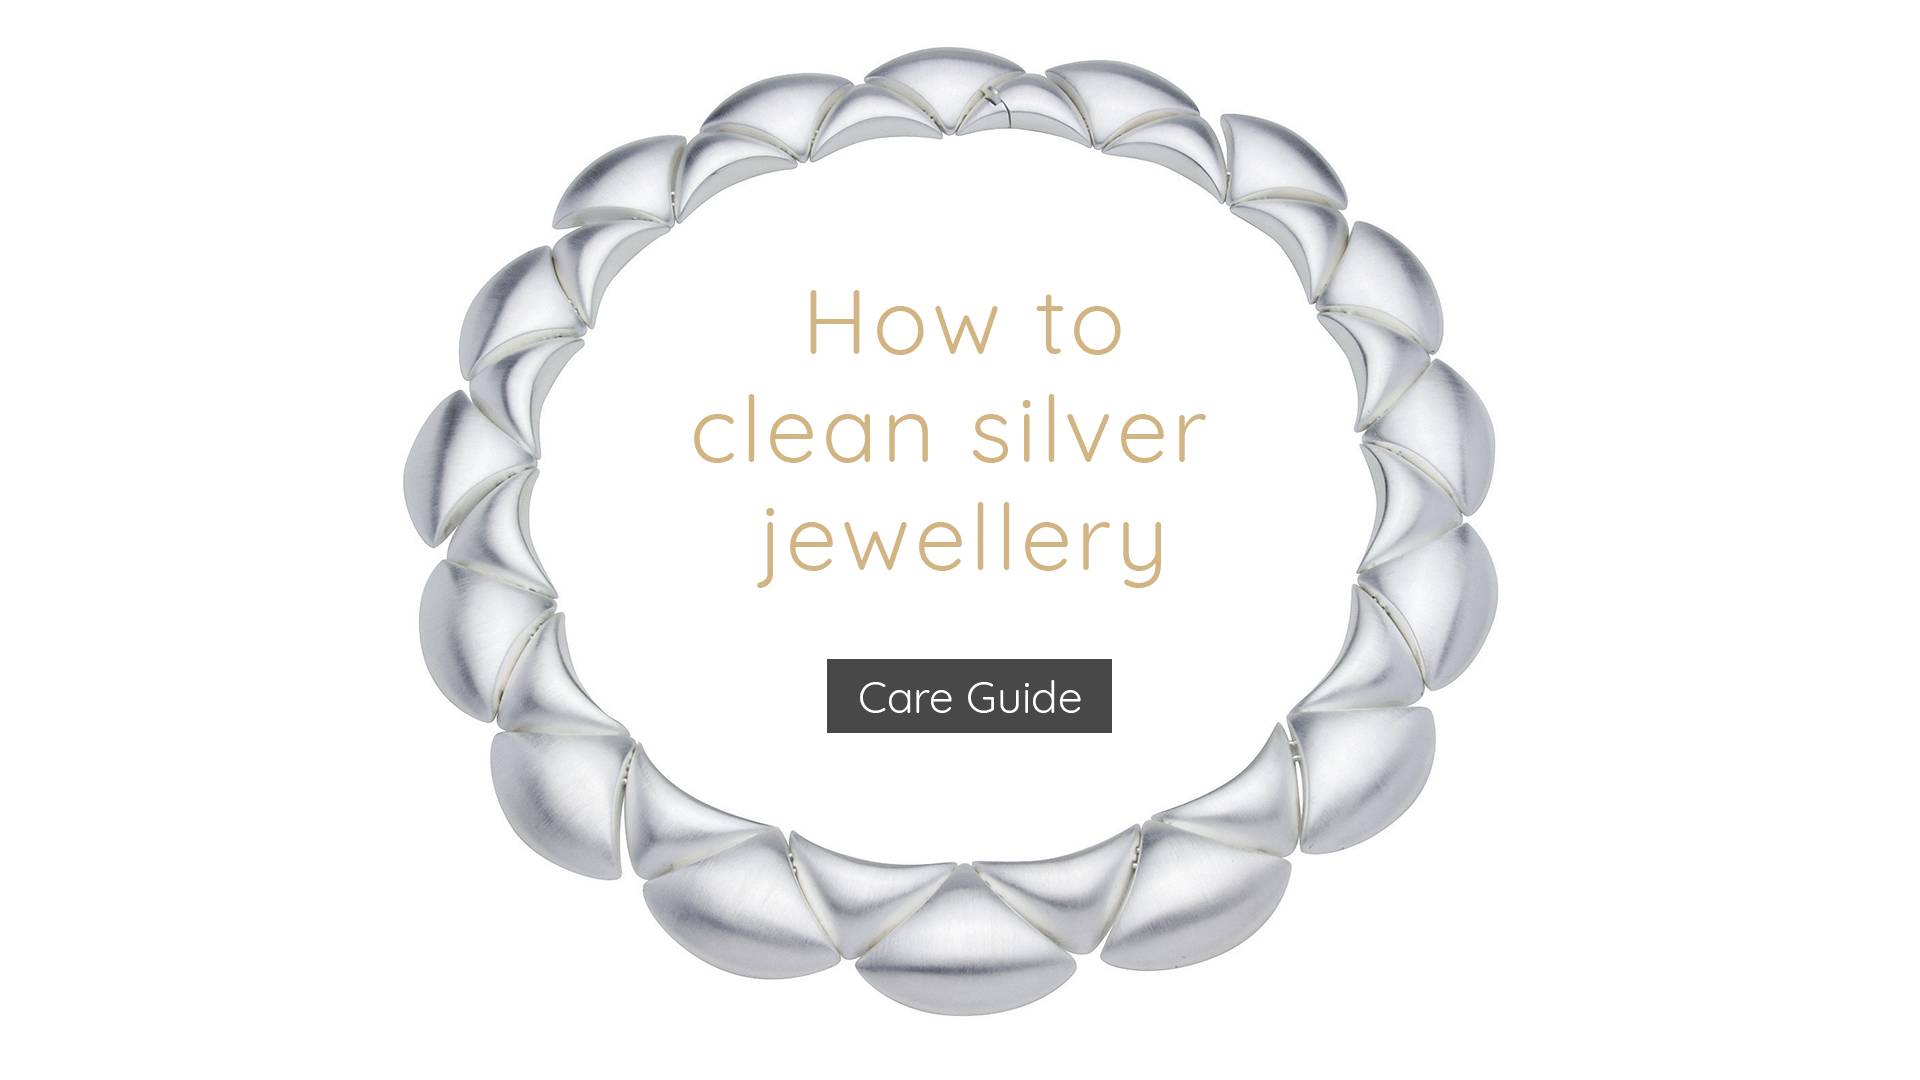 How to clean silver jewellery